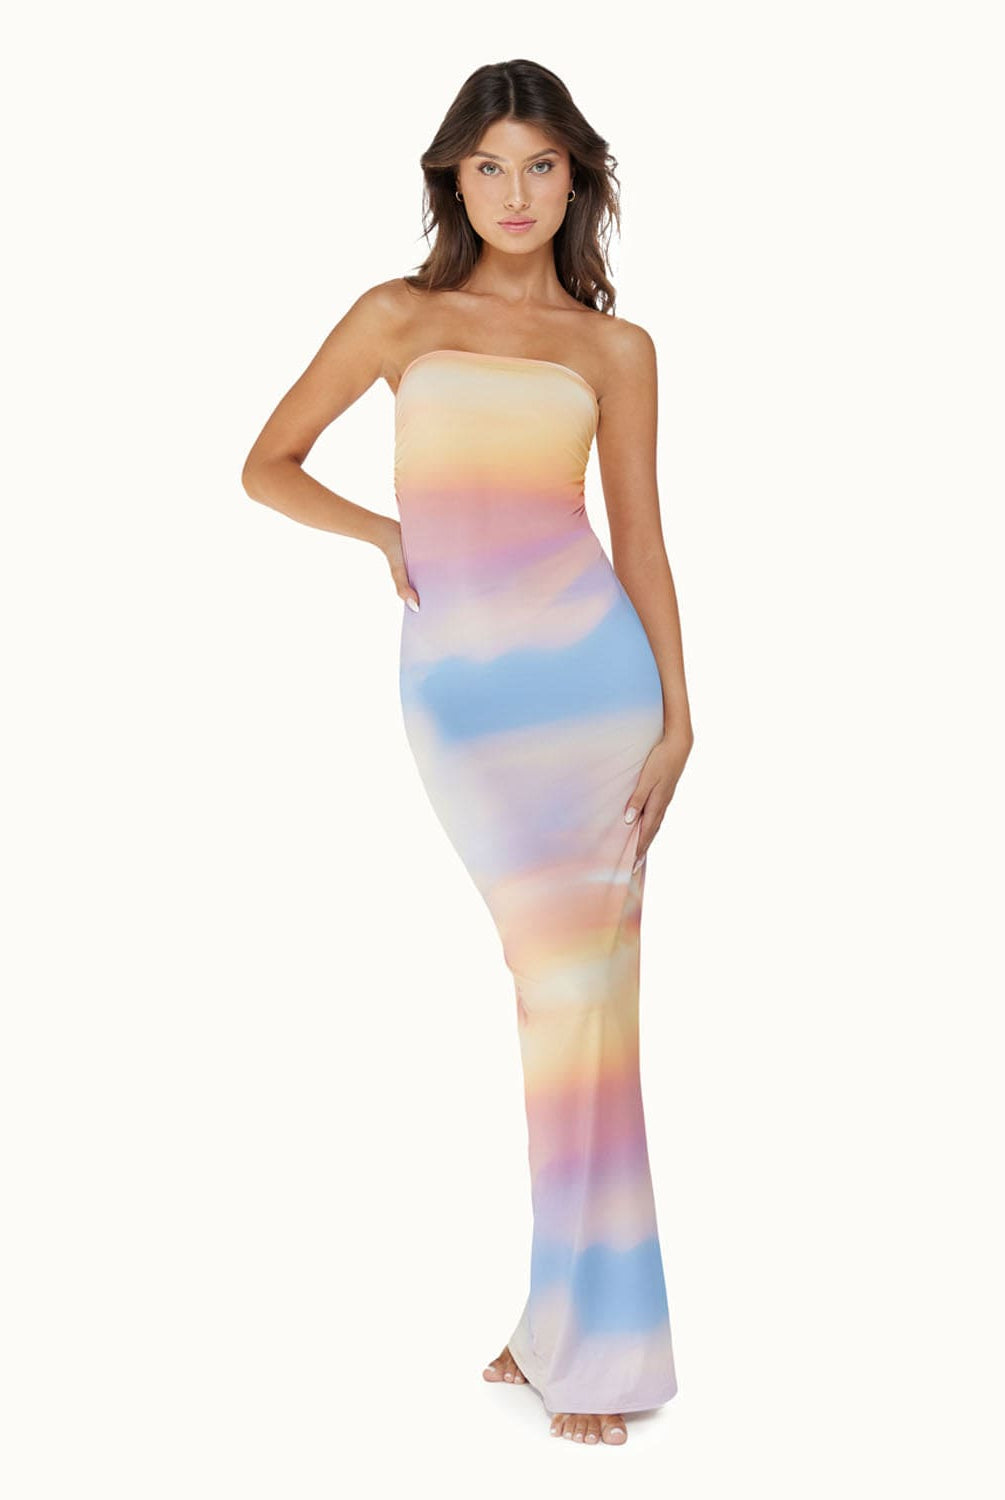 A brunette woman wearing a multi colored floor length dress standing in front of a white wall. 